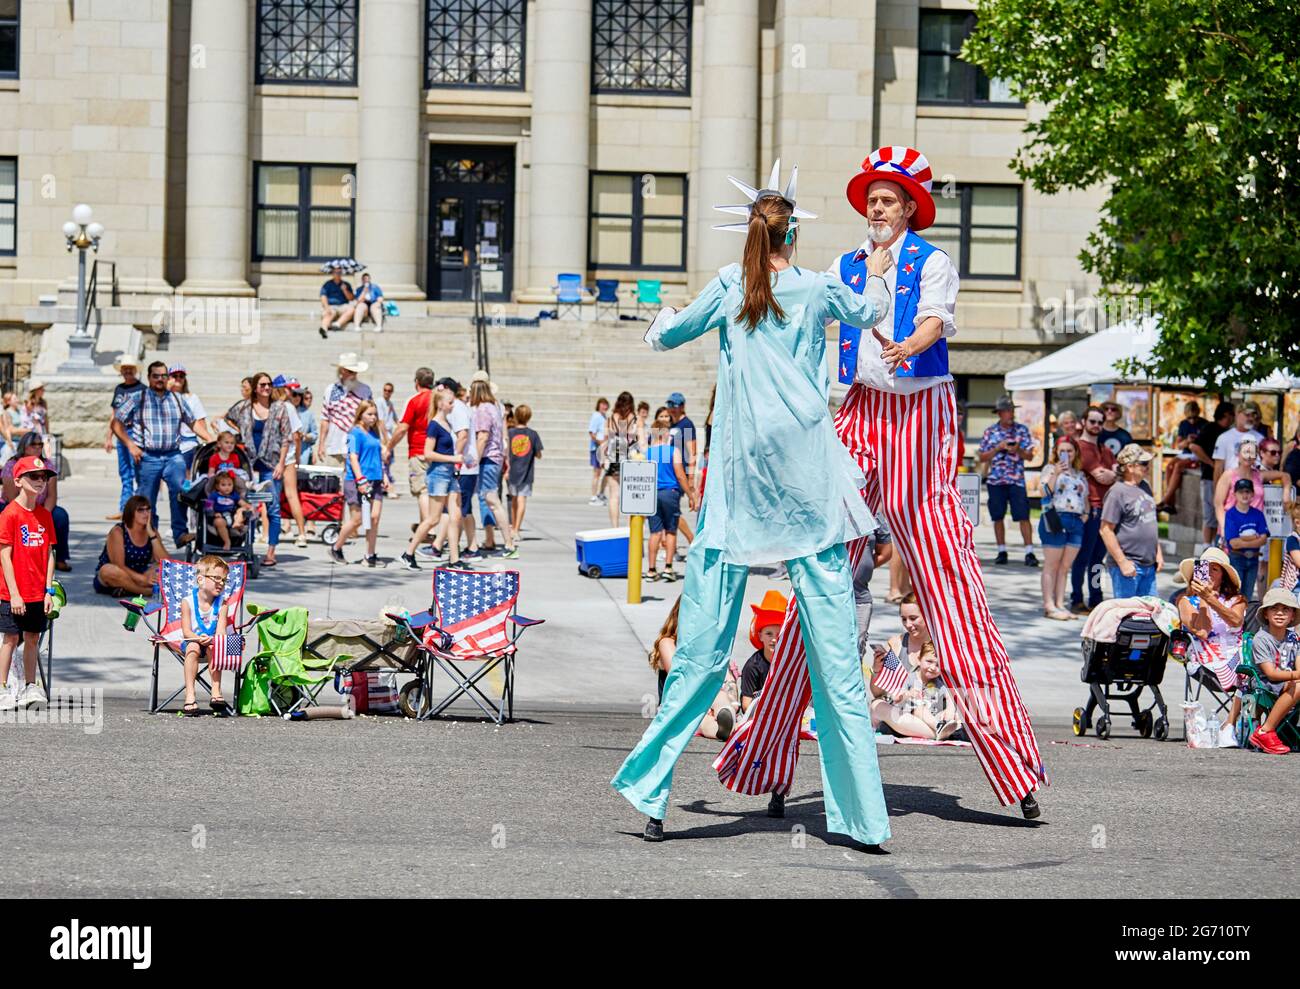 Prescott, Arizona, USA - July 3, 2021: Man and woman on stilts dressed in costume  in the 4th of July parade Stock Photo